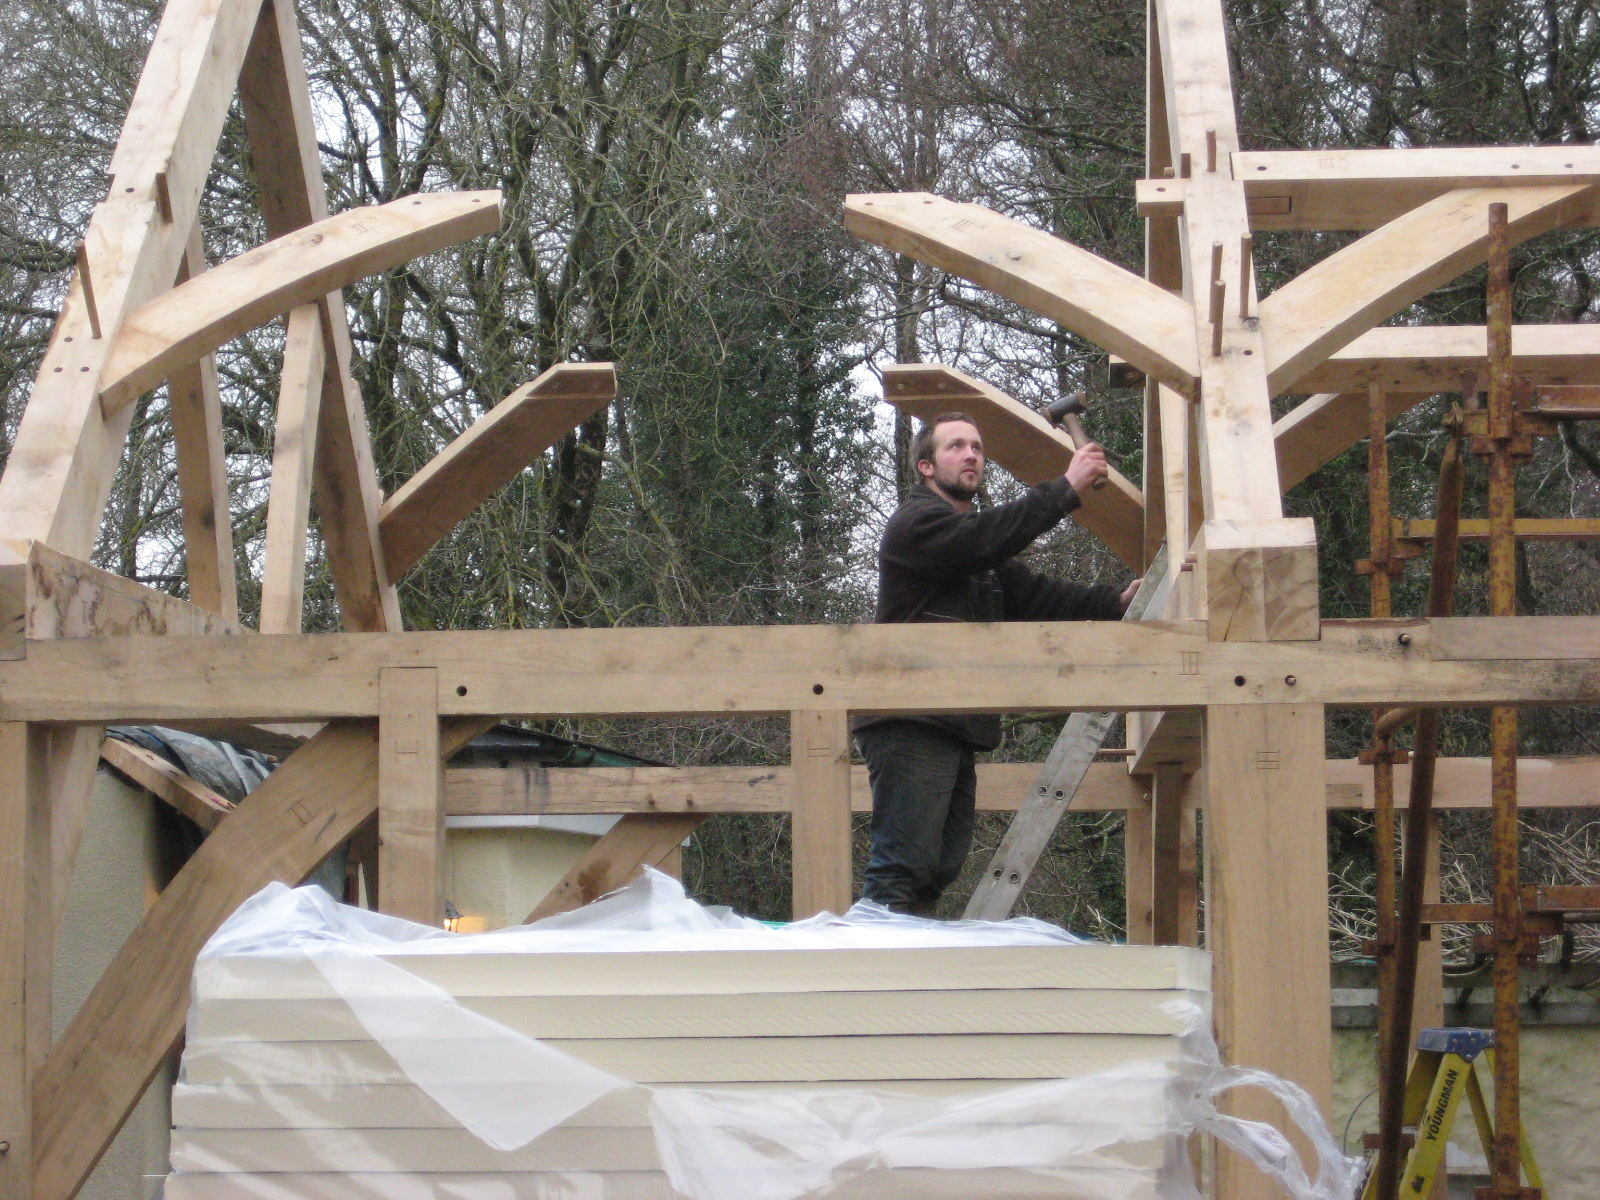 timber frame under construction by Devon and Cornwall timber framers